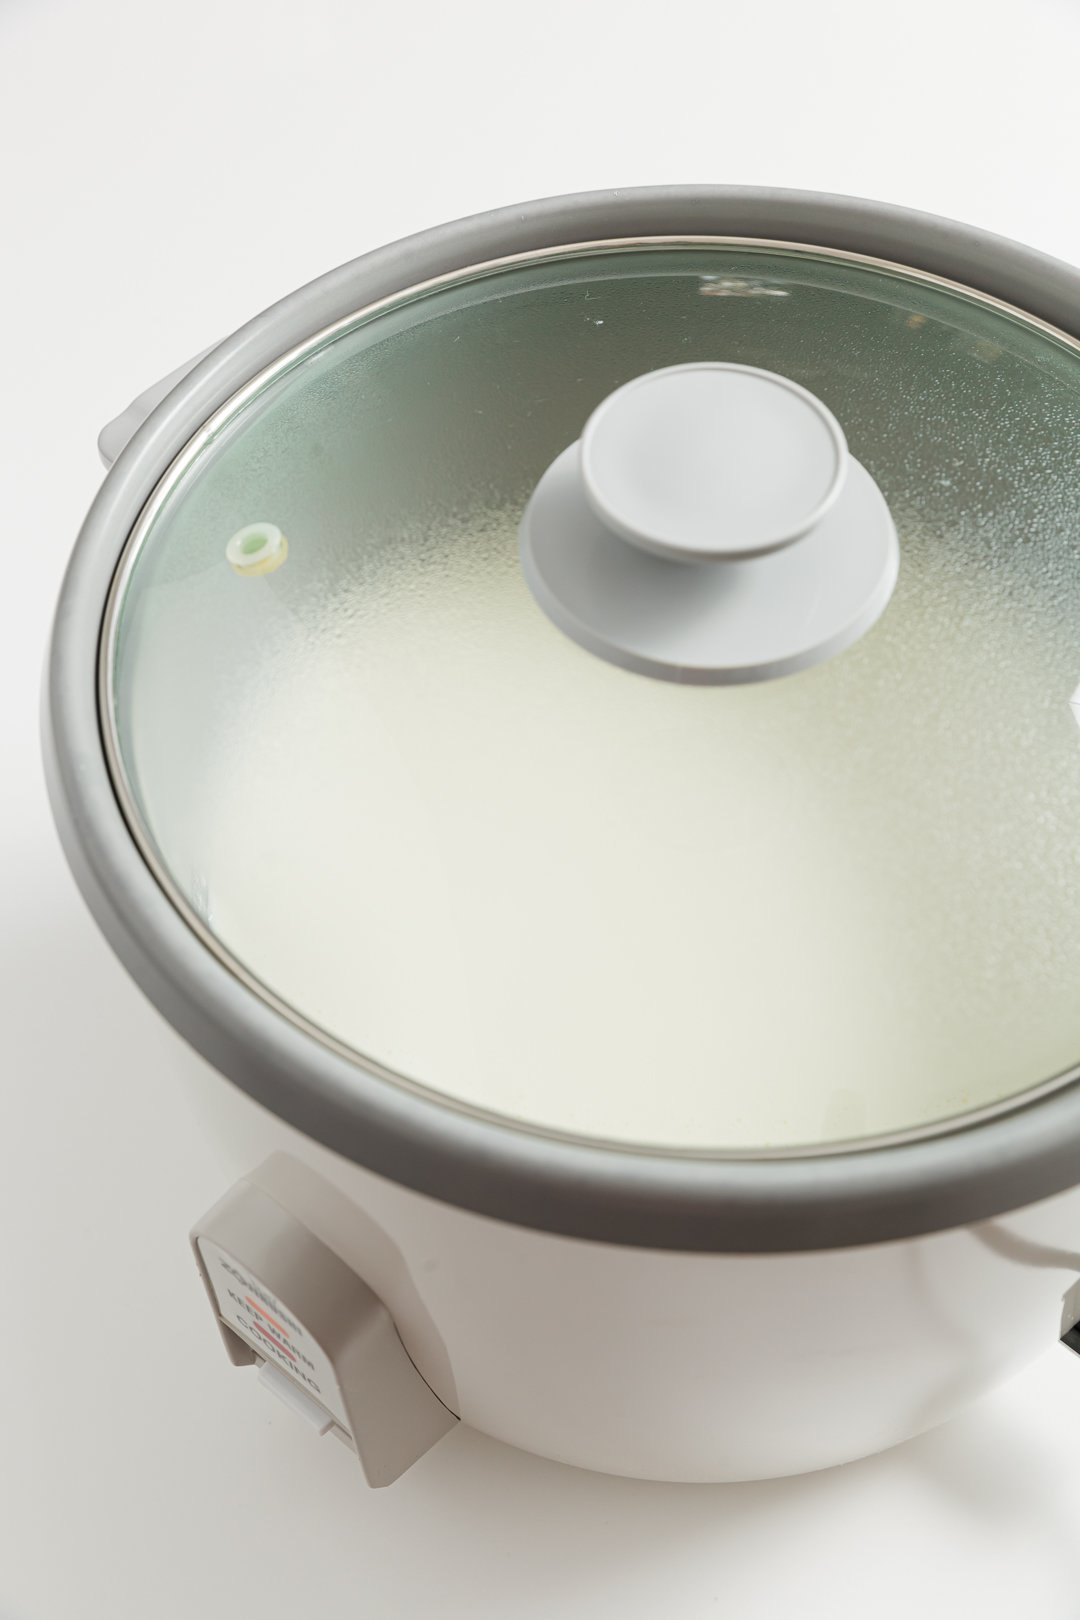 A lidded rice cooker filled with heavy whipping cream on its keep warm setting